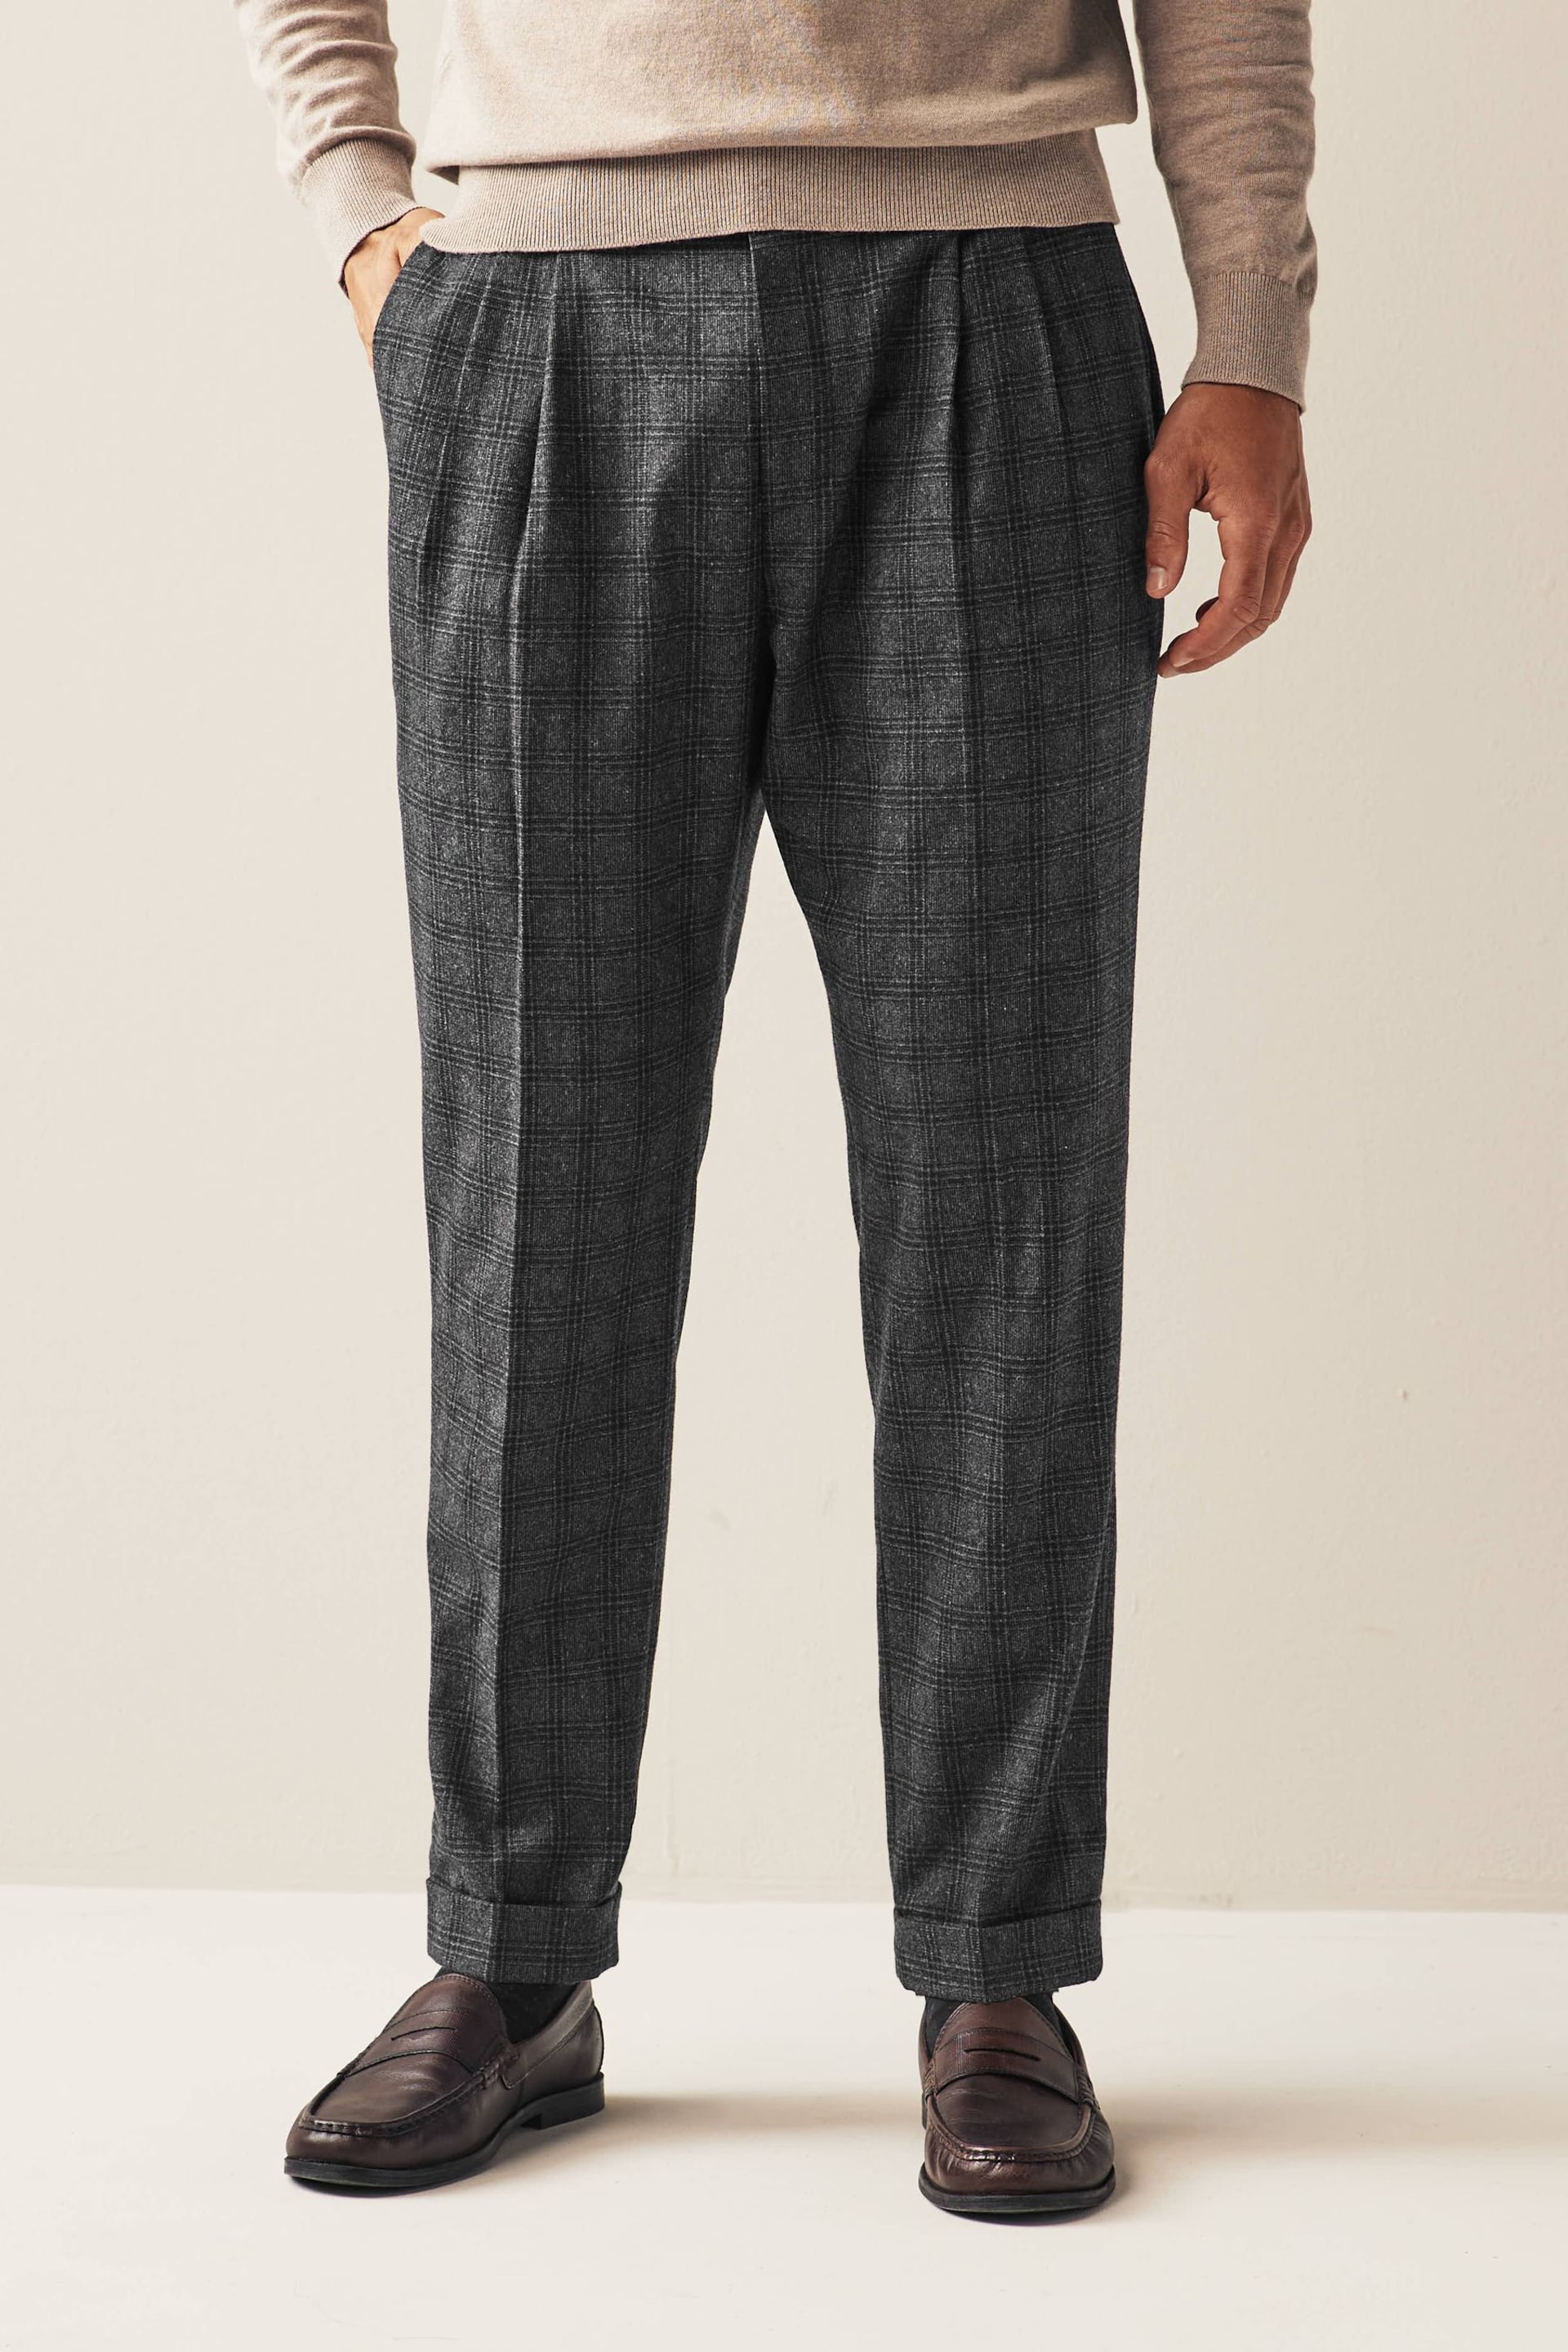 Navy Blue Check Nova Fides Italian Fabric Trousers With Wool - Image 1 of 9